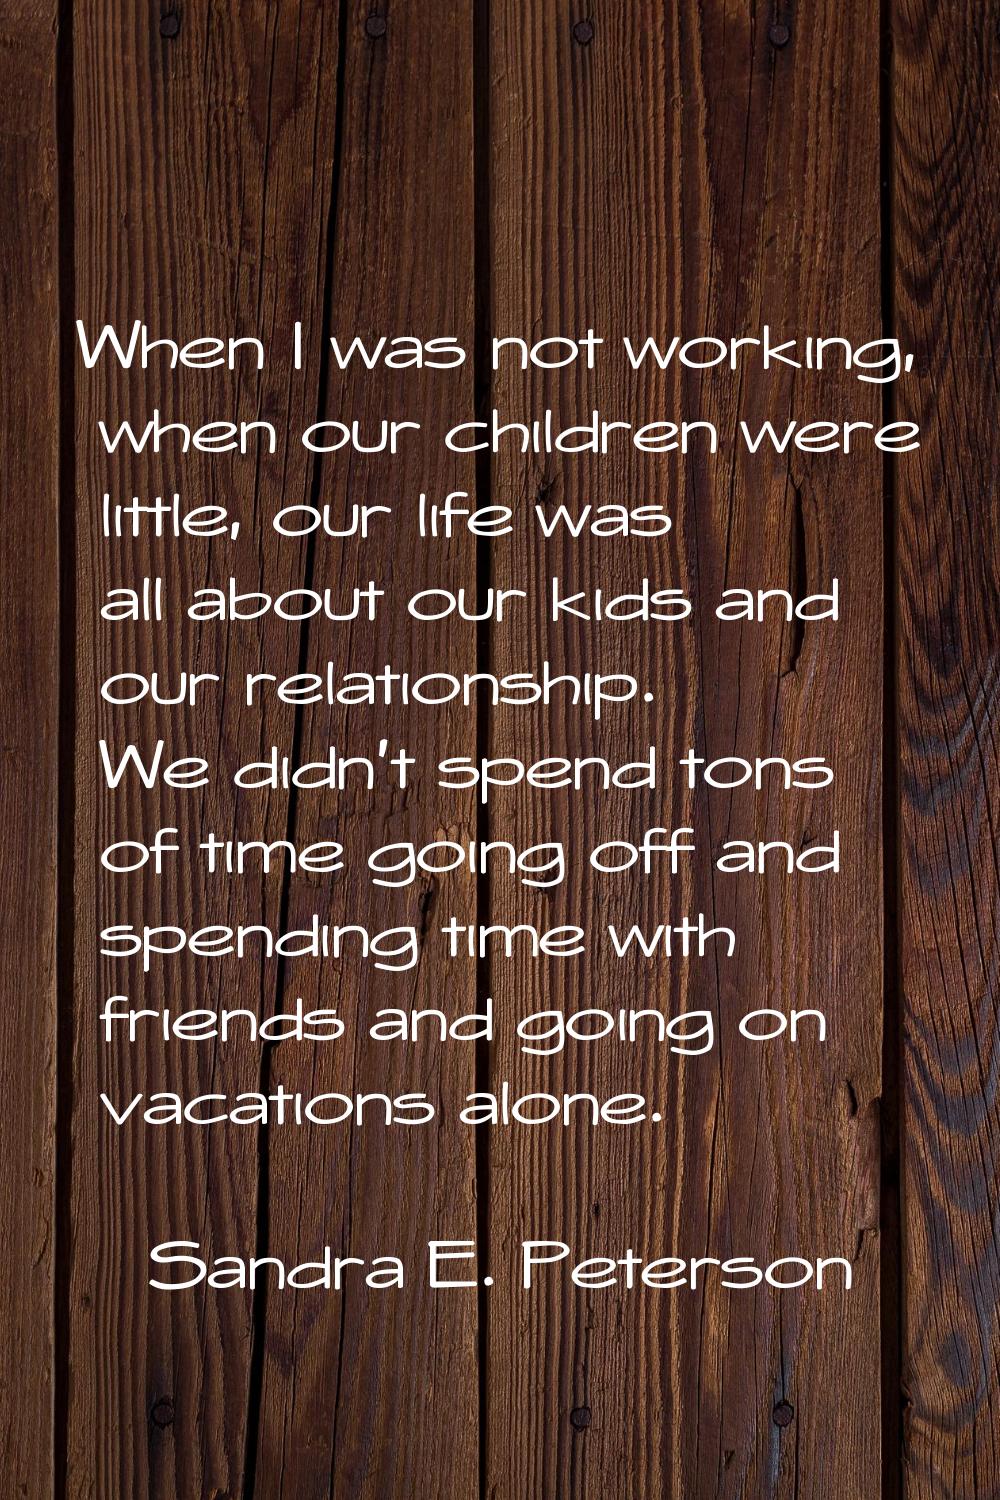 When I was not working, when our children were little, our life was all about our kids and our rela